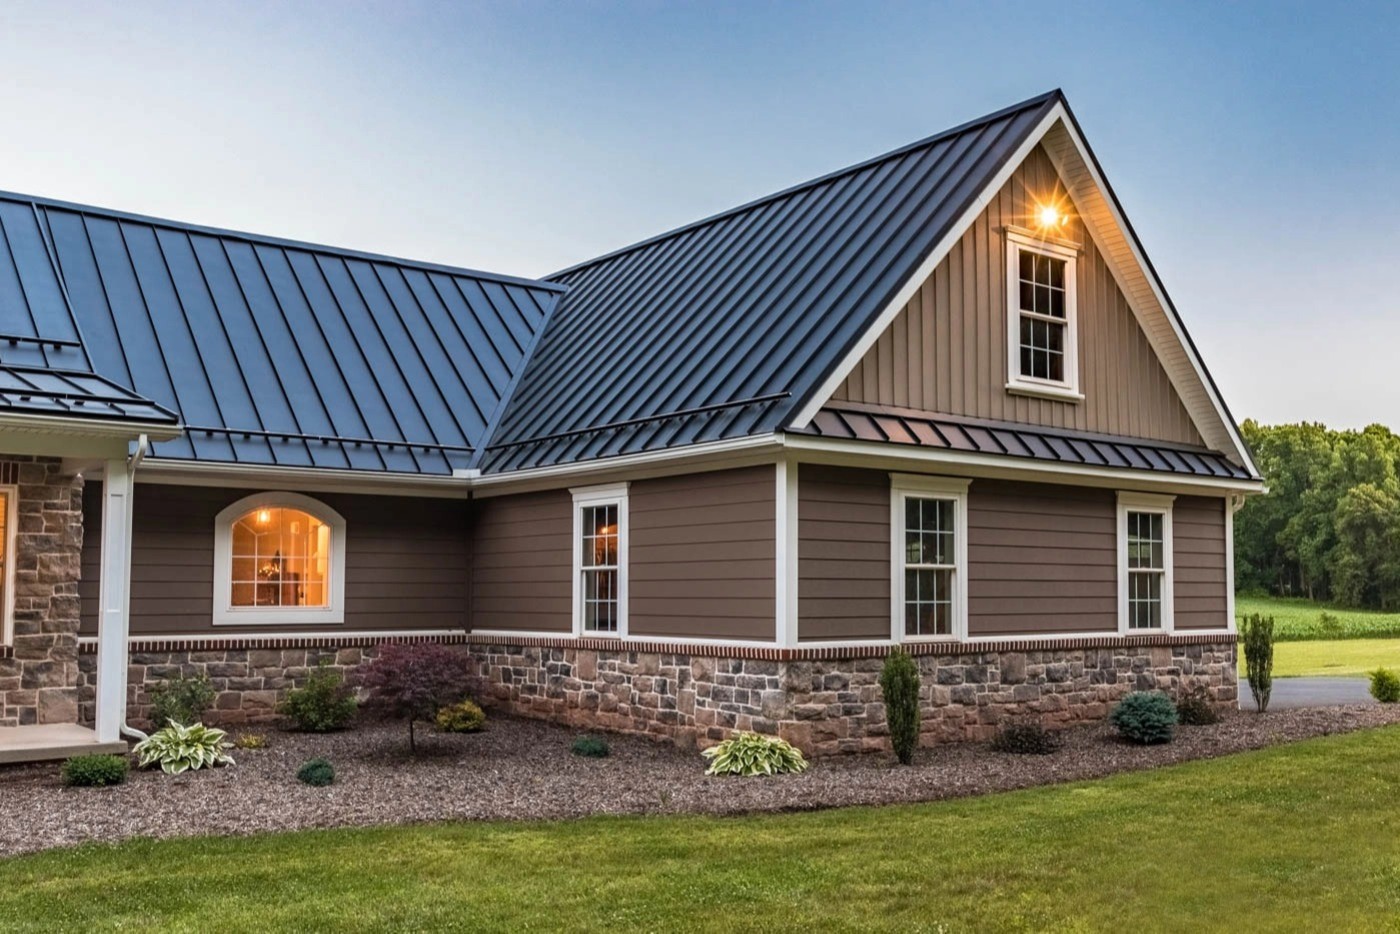 Home Value With Superior Roof Covering